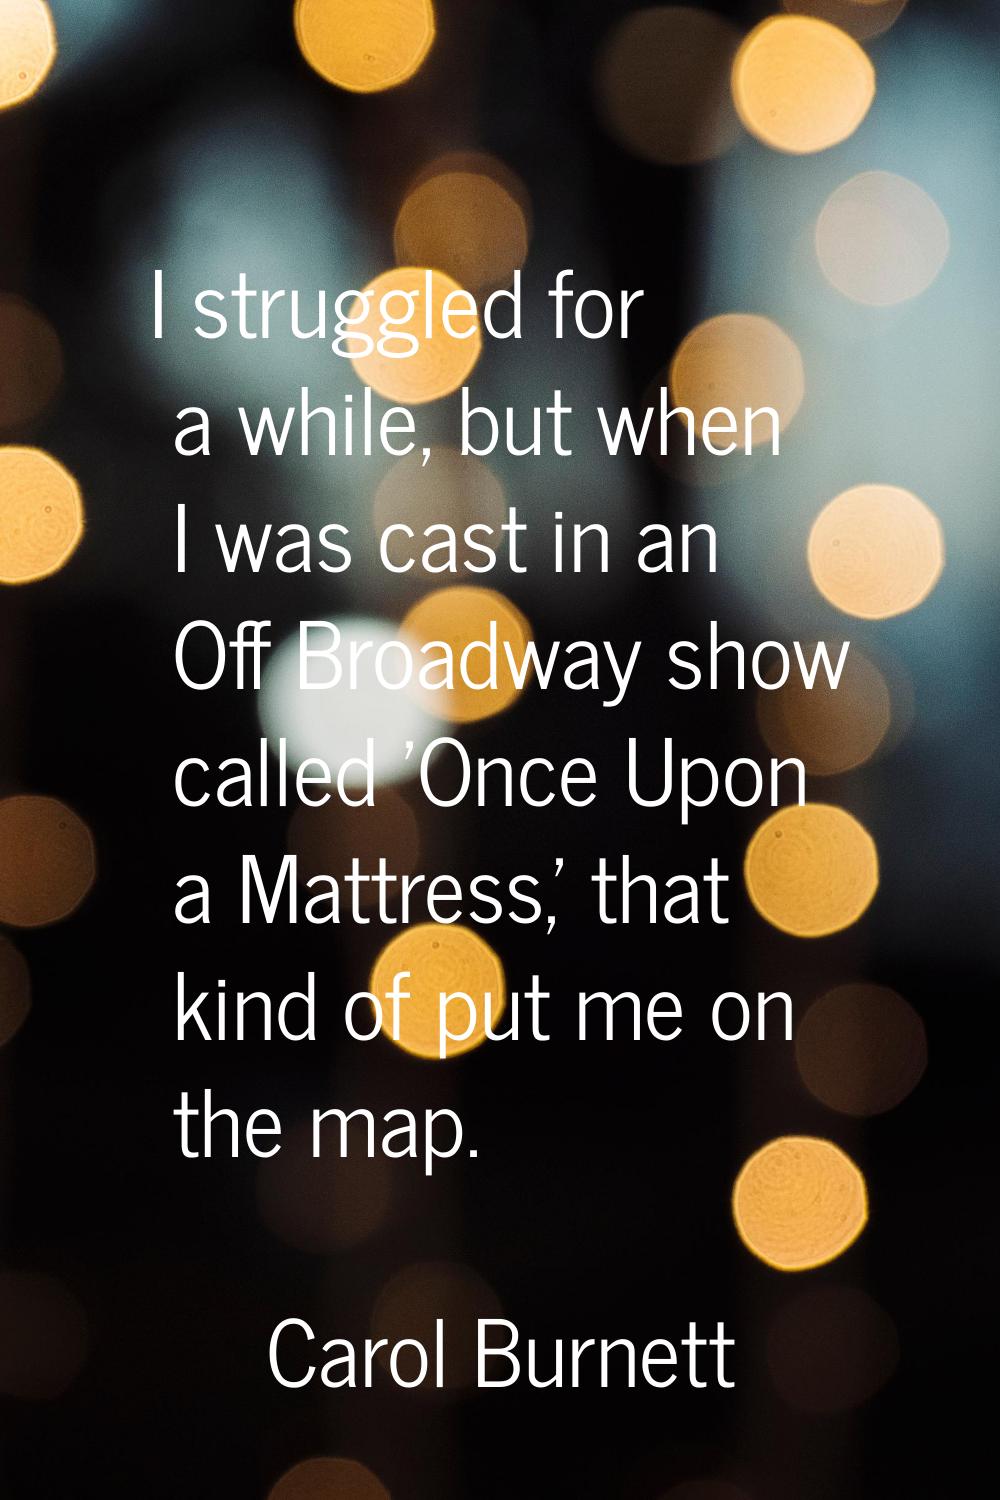 I struggled for a while, but when I was cast in an Off Broadway show called 'Once Upon a Mattress,'